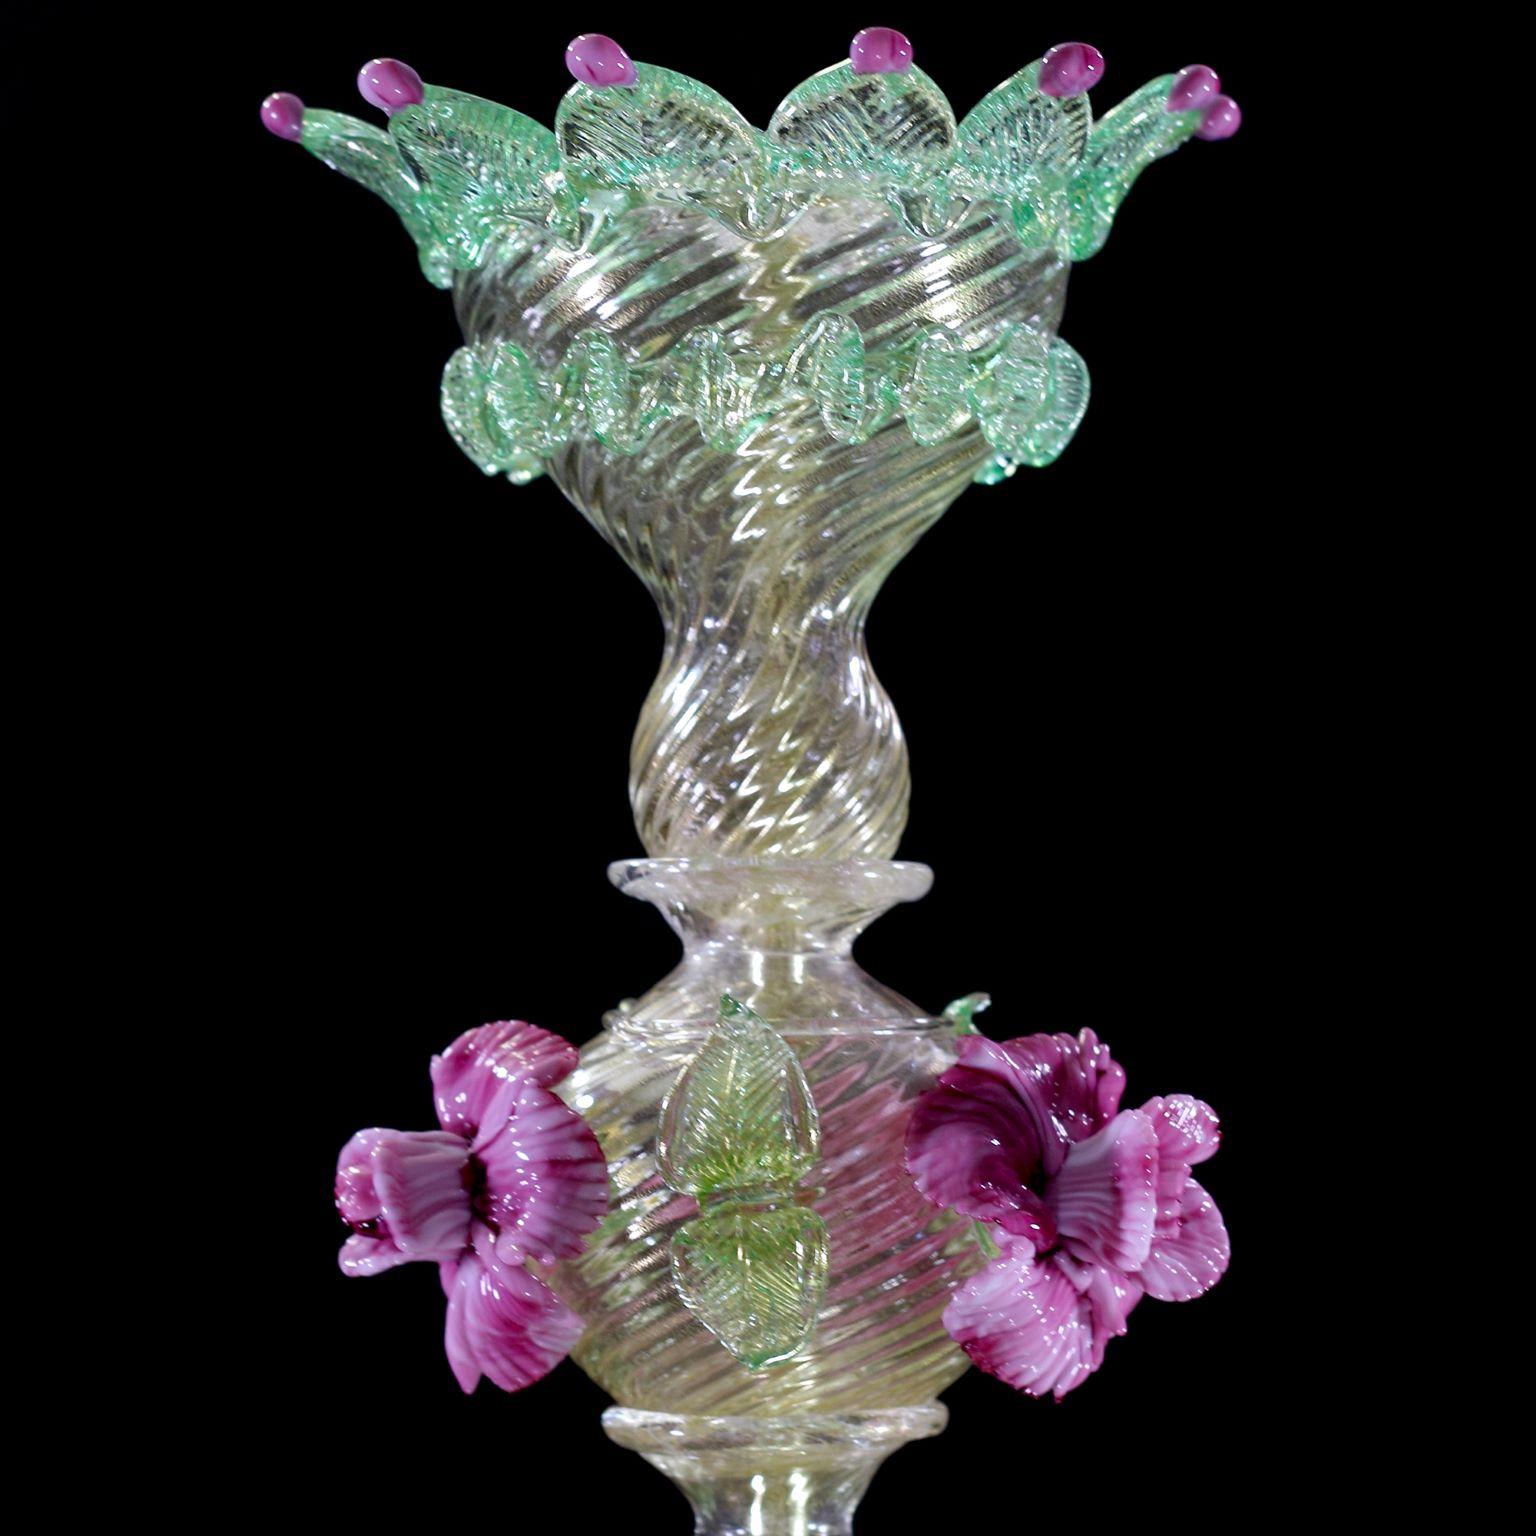 Italian Artistic Chandelier 6 Arms Gold Murano Glass Pink and Gree Details by Multiforme For Sale